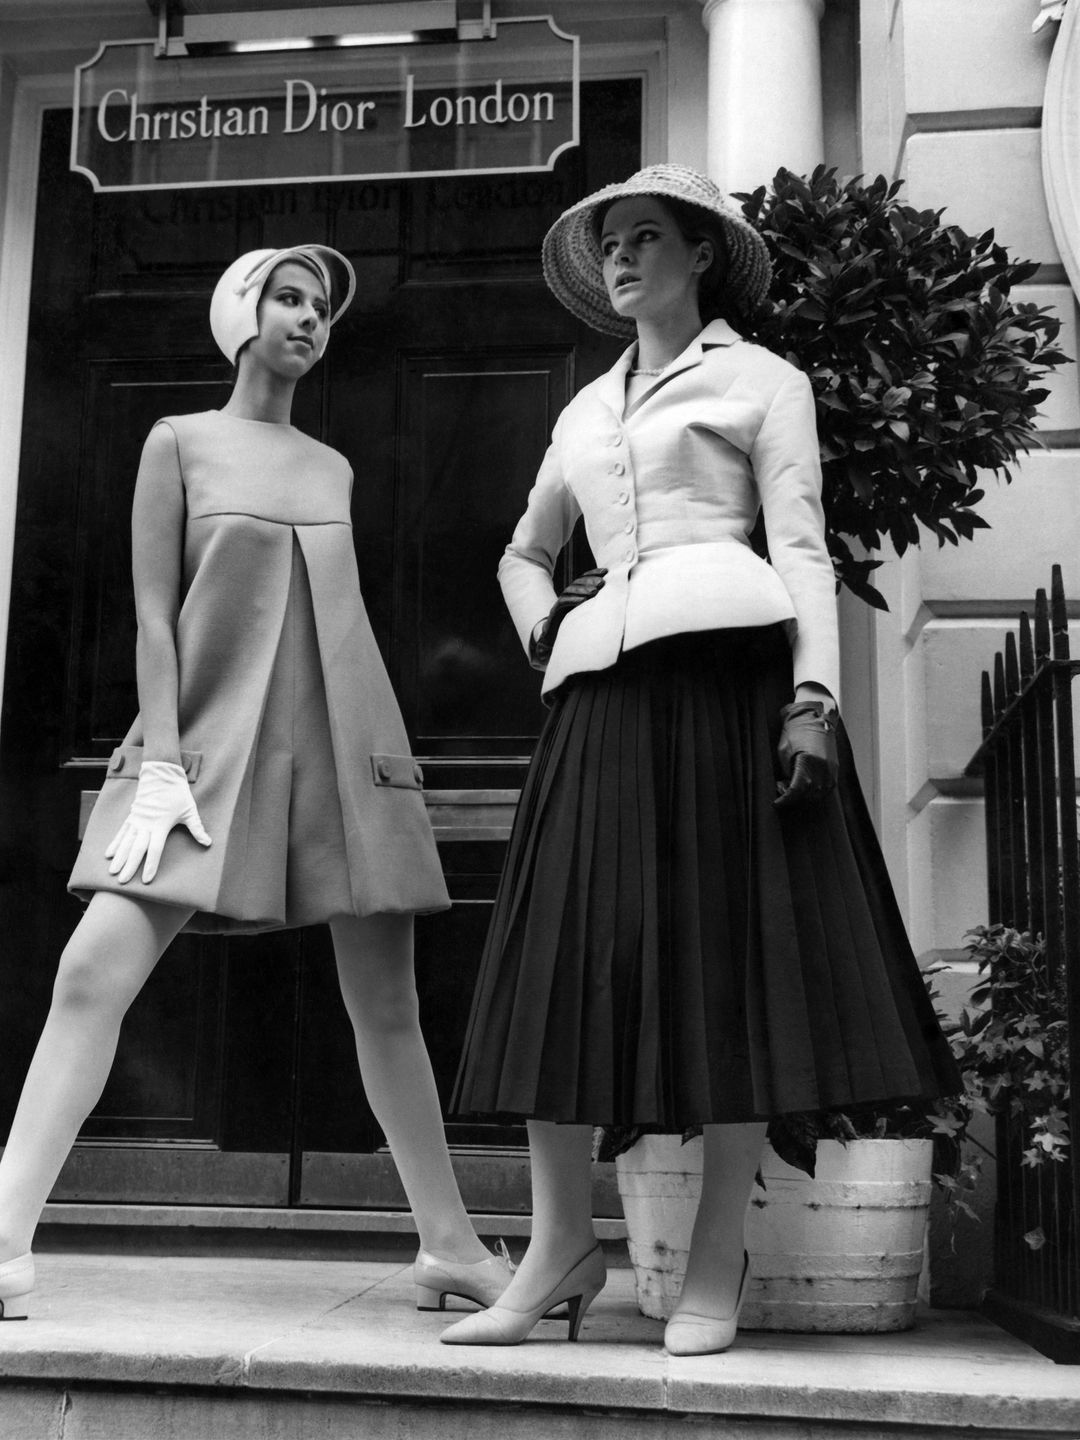 On the right is an original 1947 Dior outfit - known at the time as the "New Look". On the left is Dior's Newer Look - from their 1967 collection